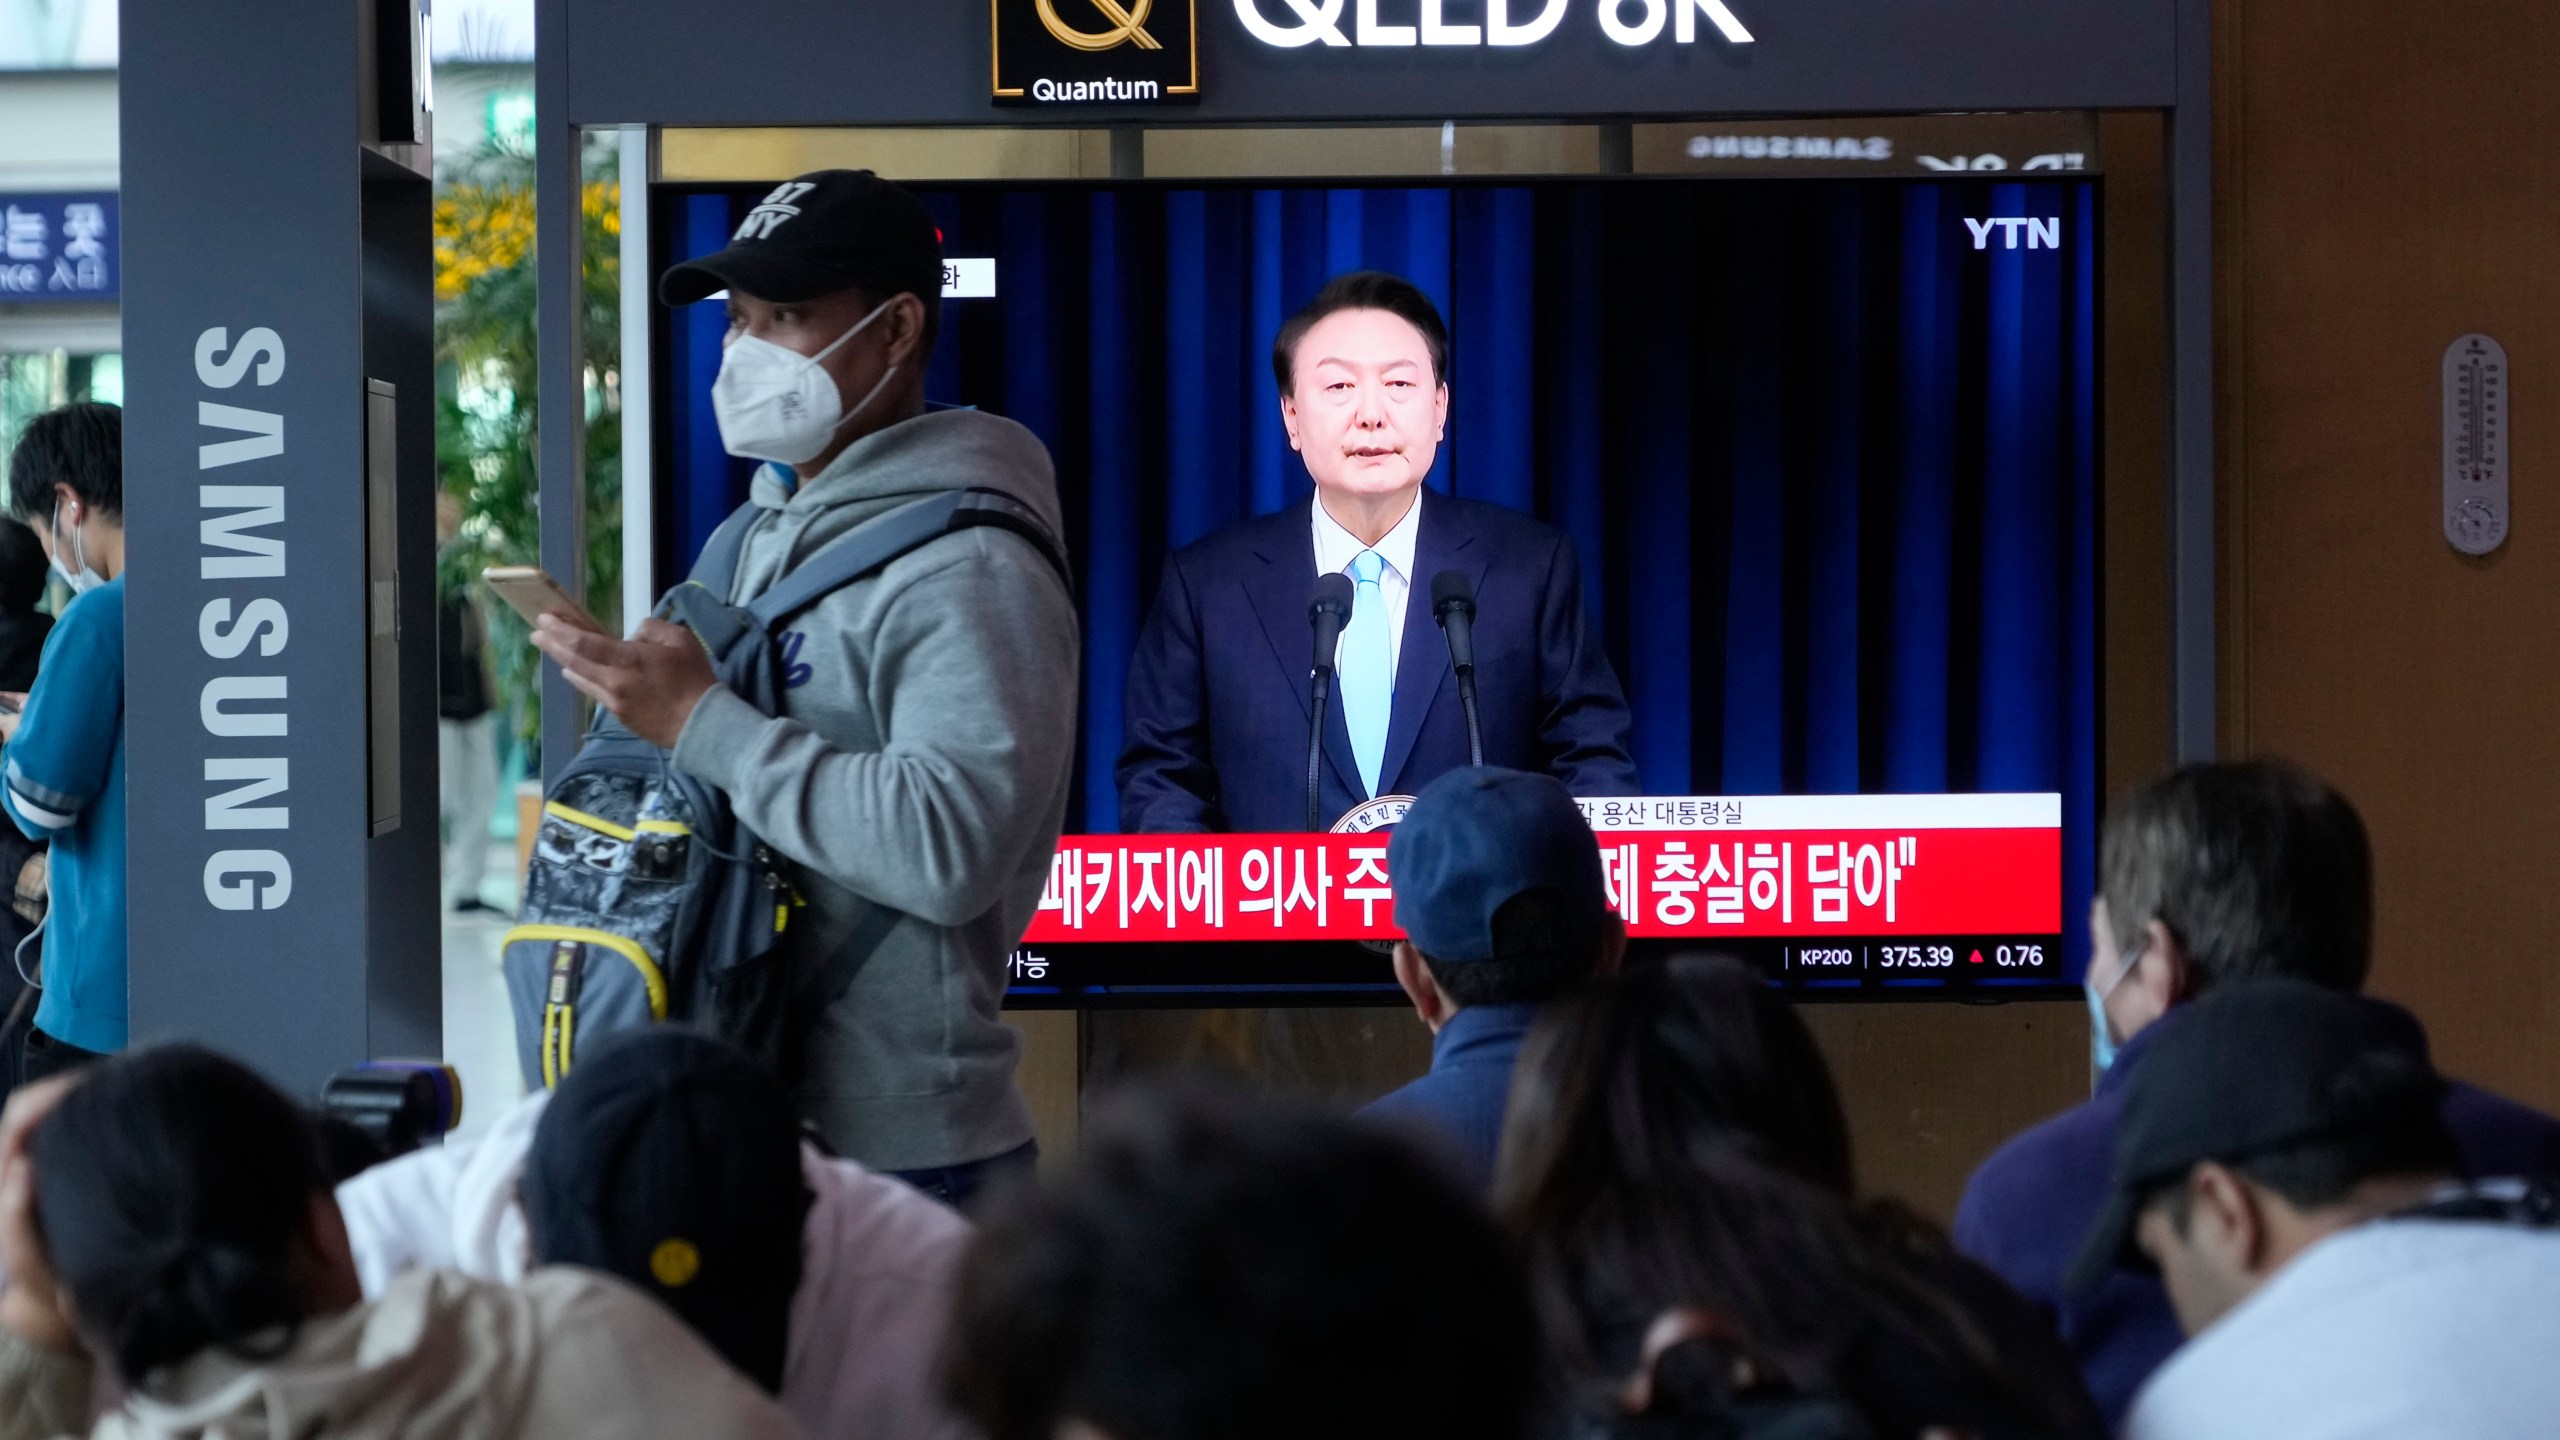 People watch a TV screen showing the live broadcast of South Korean President Yoon Suk Yeol’s addressing the nation at the Seoul Railway Station in Seoul, South Korea, Monday, April 1, 2024. President Yoon vowed Monday not to back down in the face of vehement protests by doctors seeking to spike his plan to drastically increase medical school admissions, as he called their walkouts “an illegal collective action” that poses "a grave threat to our society.” (AP Photo/Ahn Young-joon)